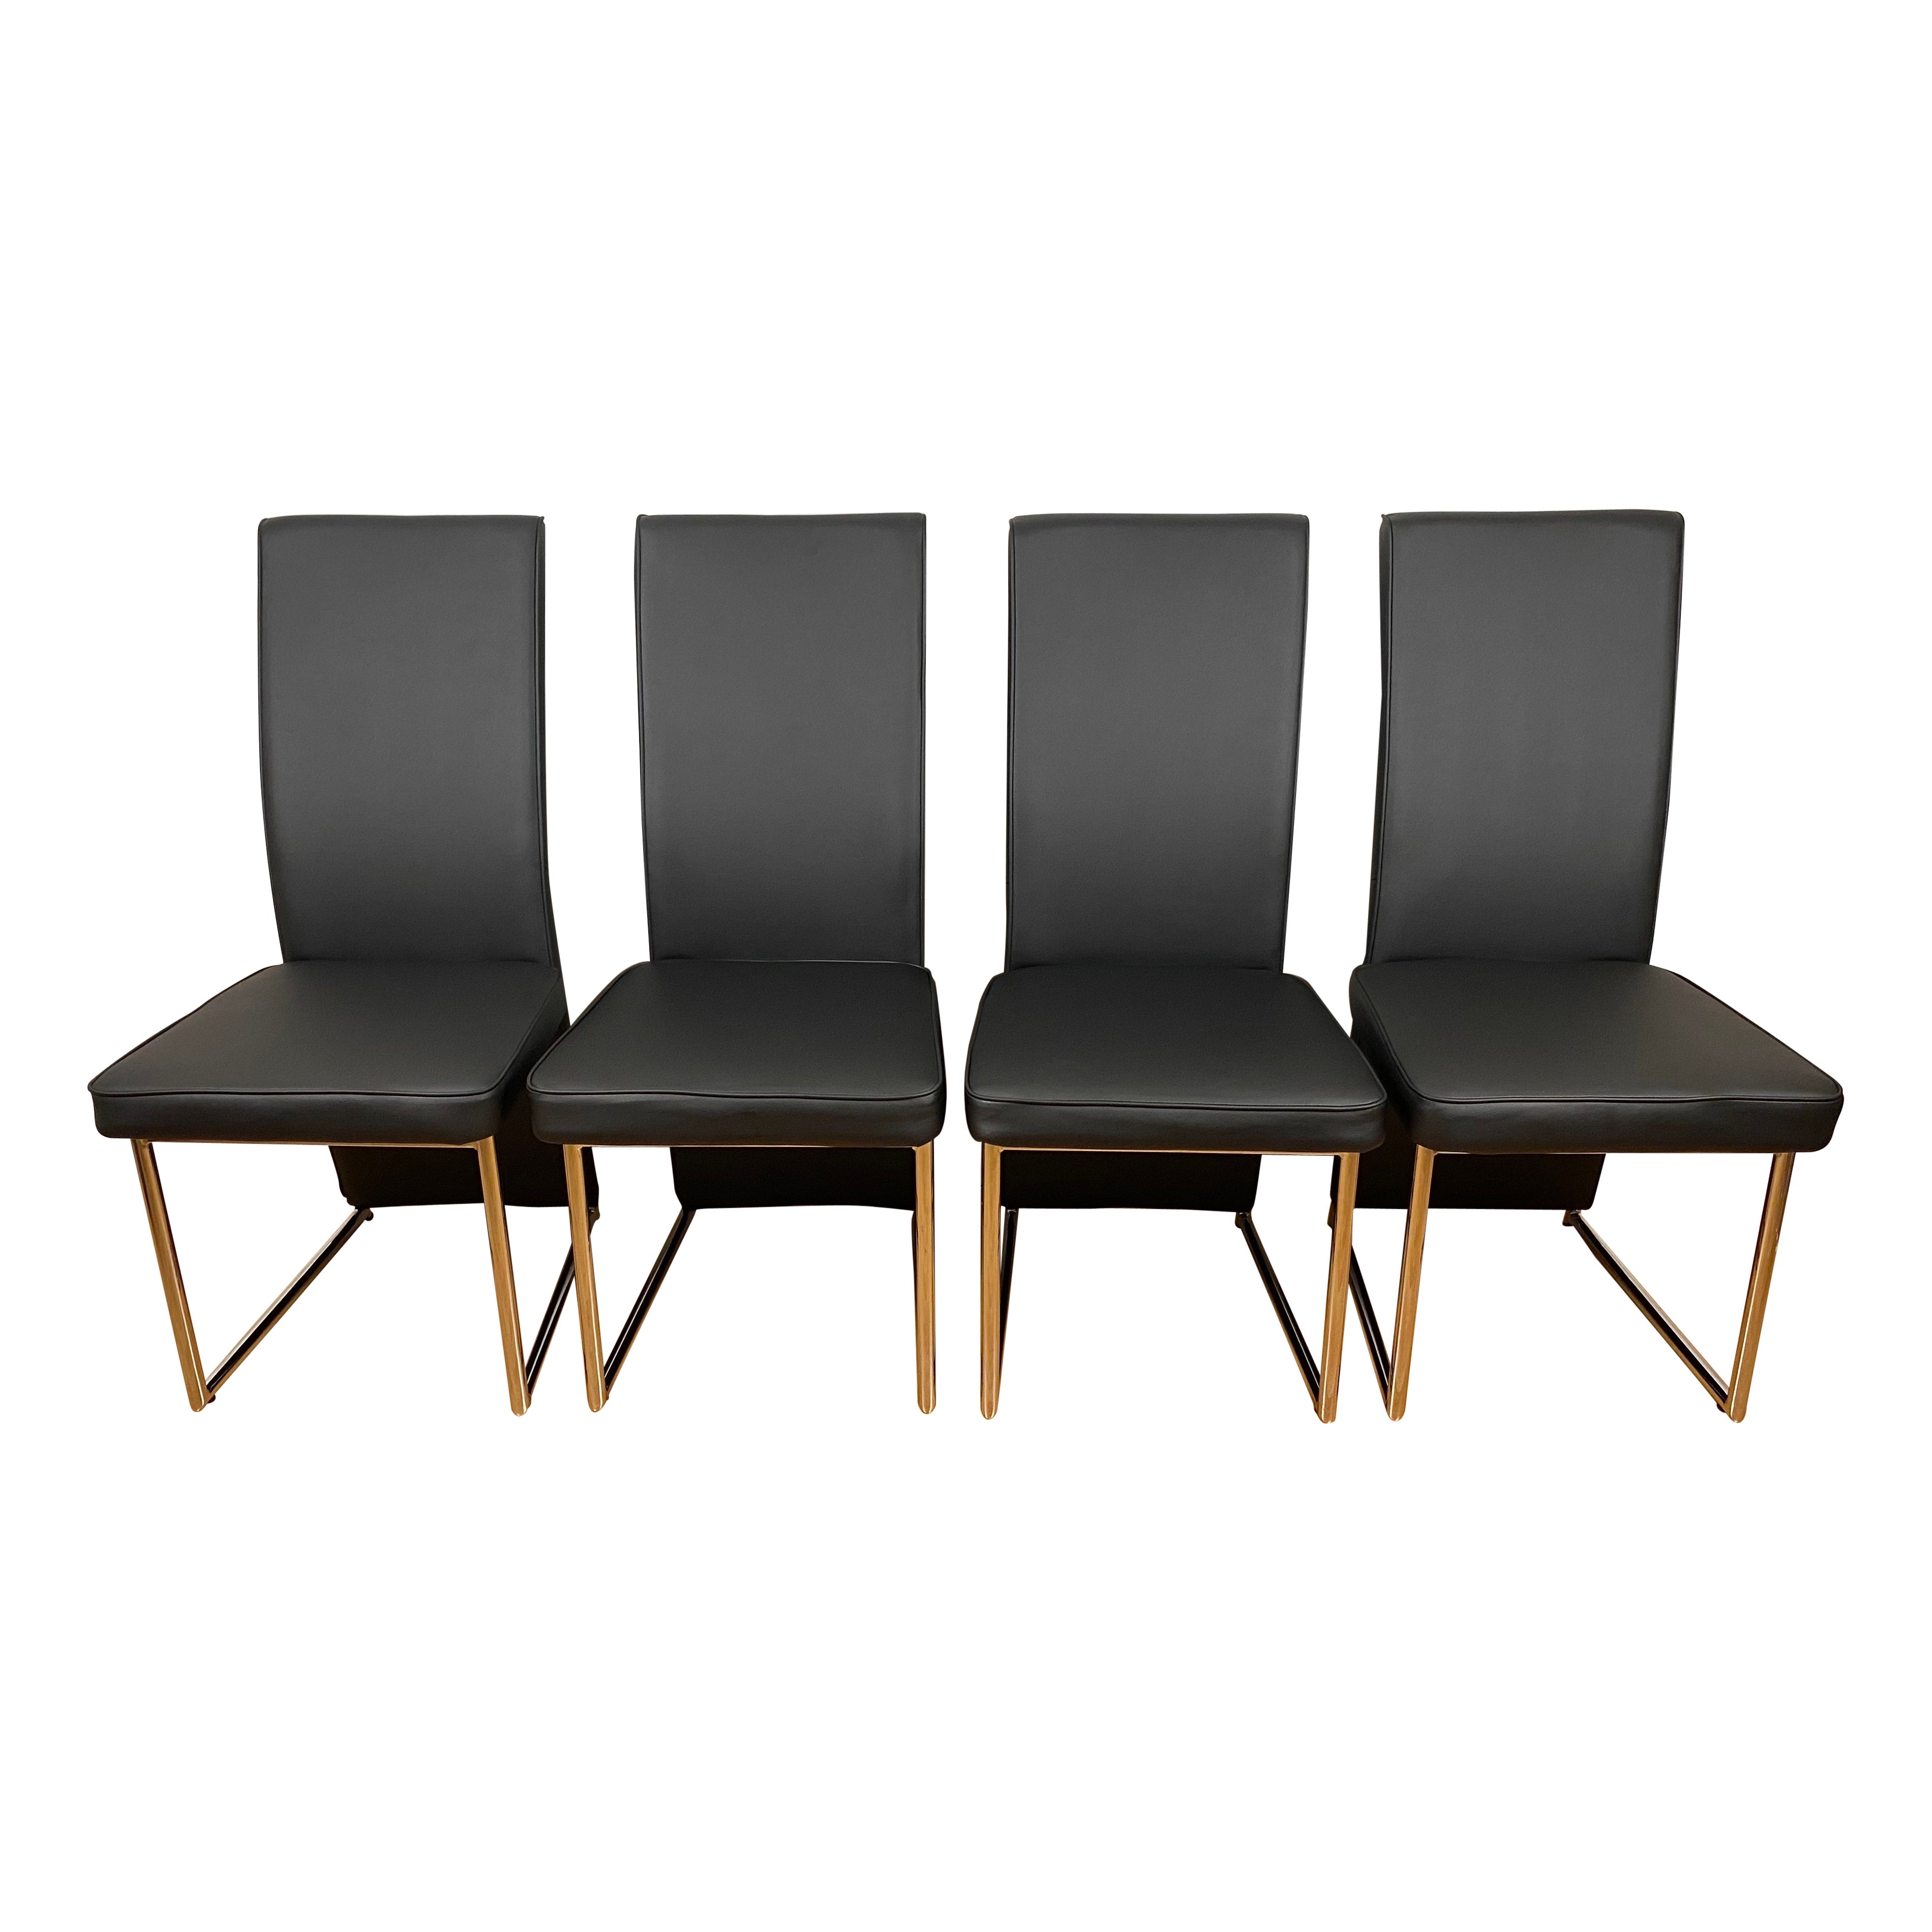 Set of 4 Baughman Style Thin Line Chrome & Black Faux Leather Dining Chairs For Sale